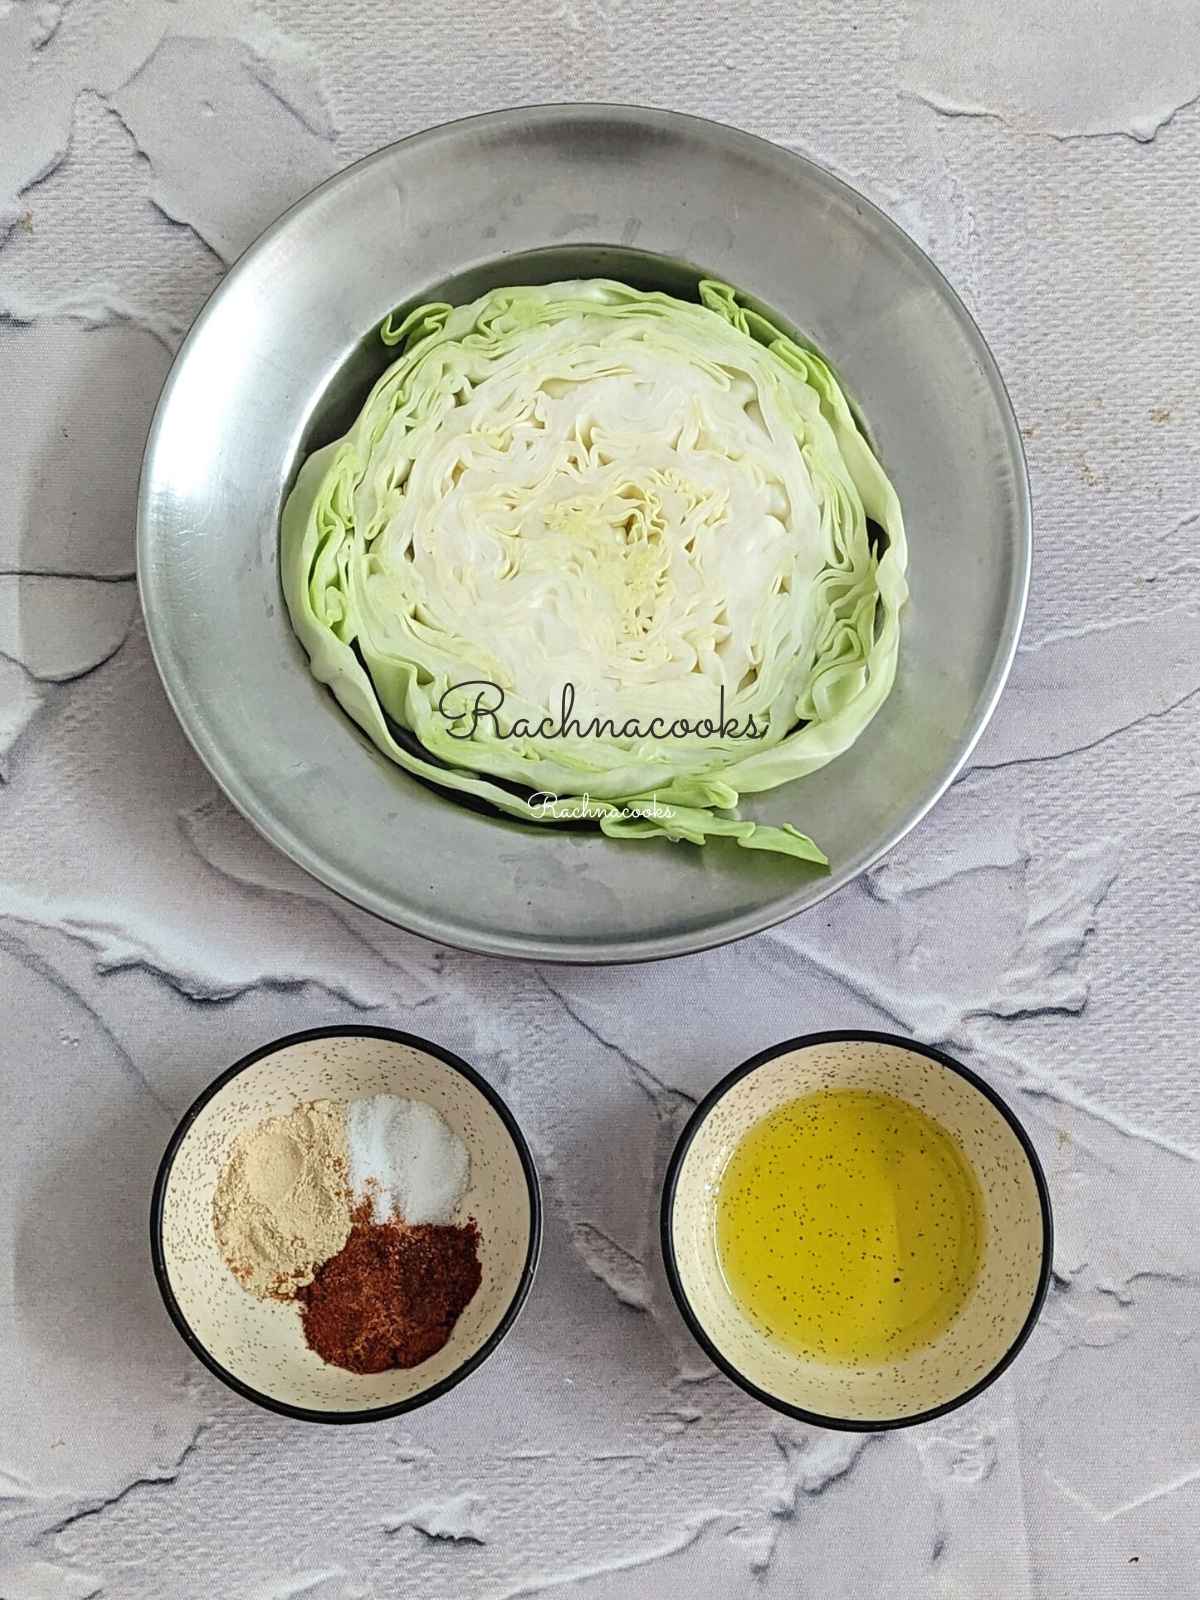 Cabbage steak in a shallow plate, olive oil and seasonings in bowls.